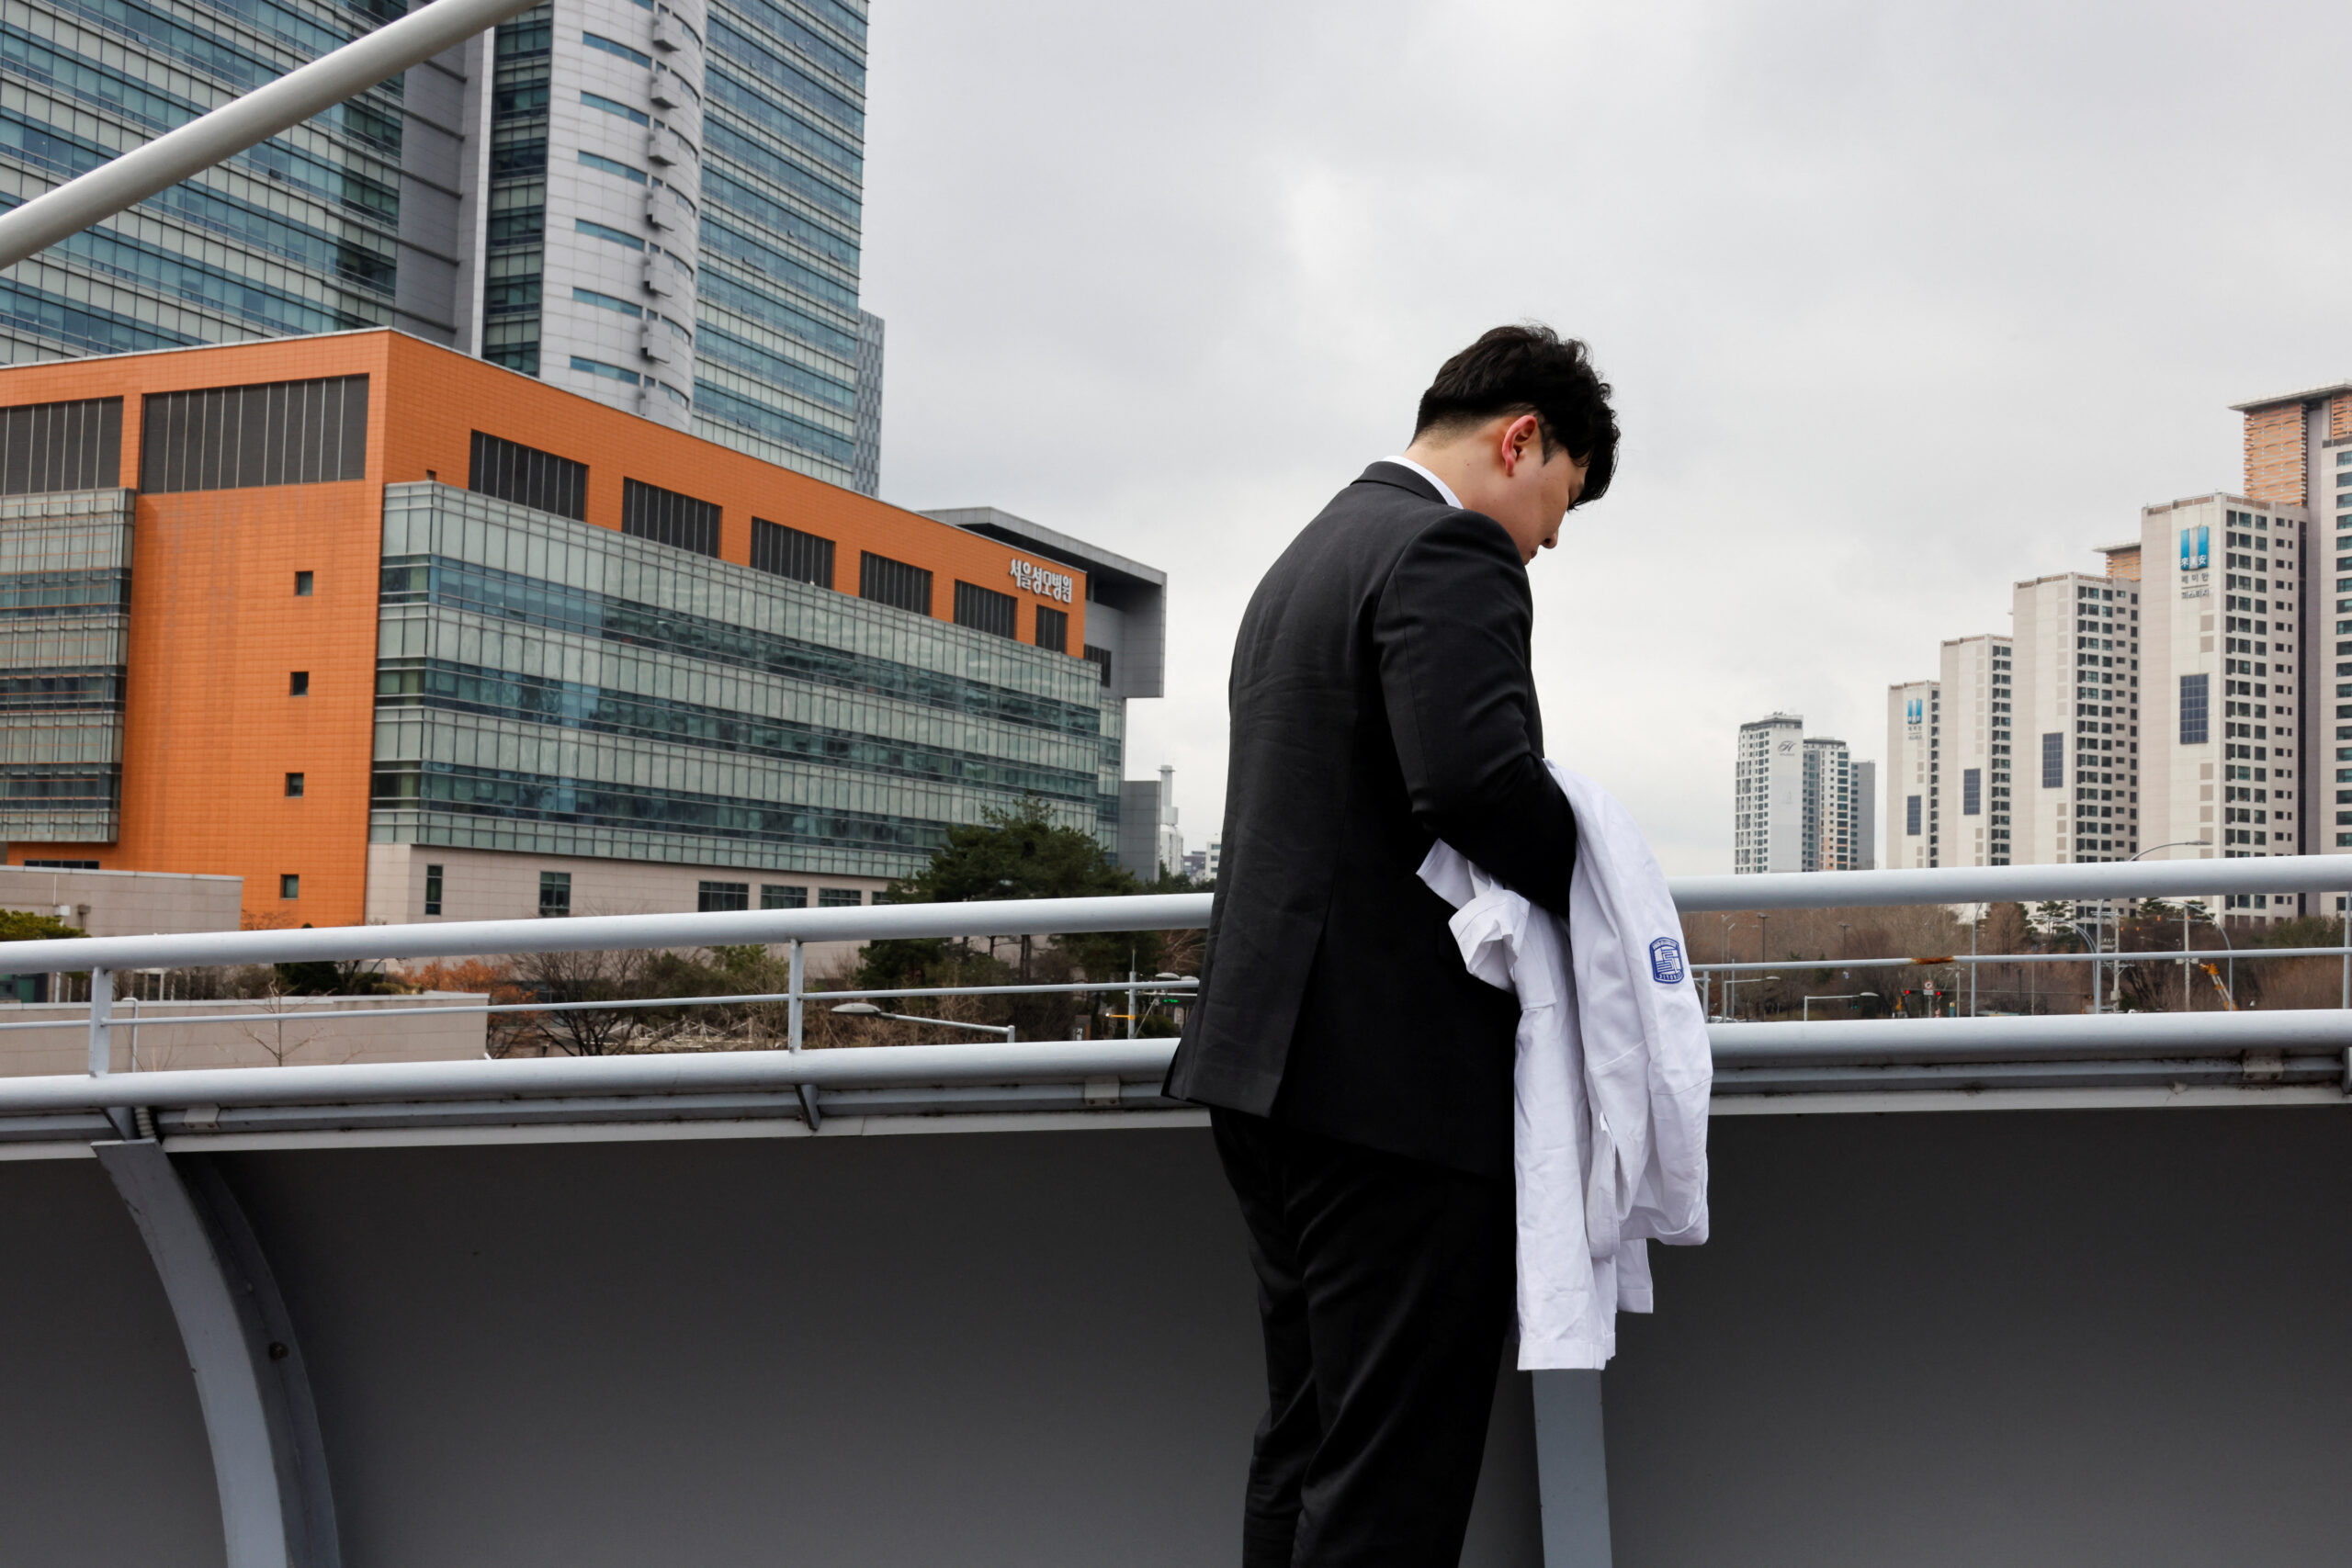 overworked and unheard, south korean doctors on mass walkout